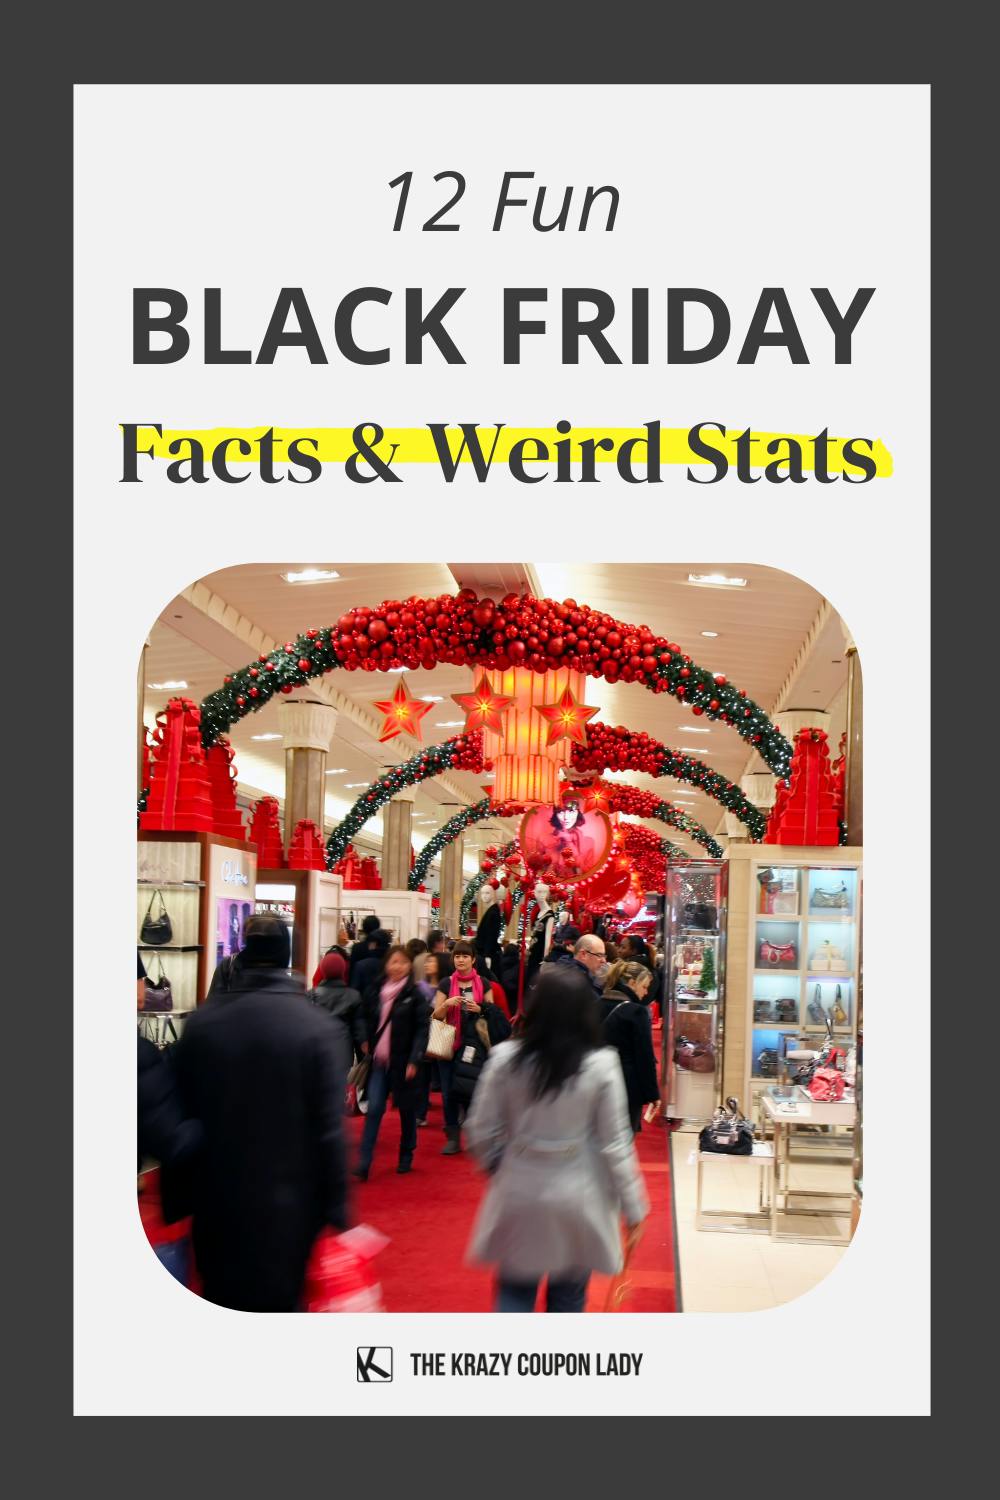 12 Fun Black Friday Facts: History and Weird Stats